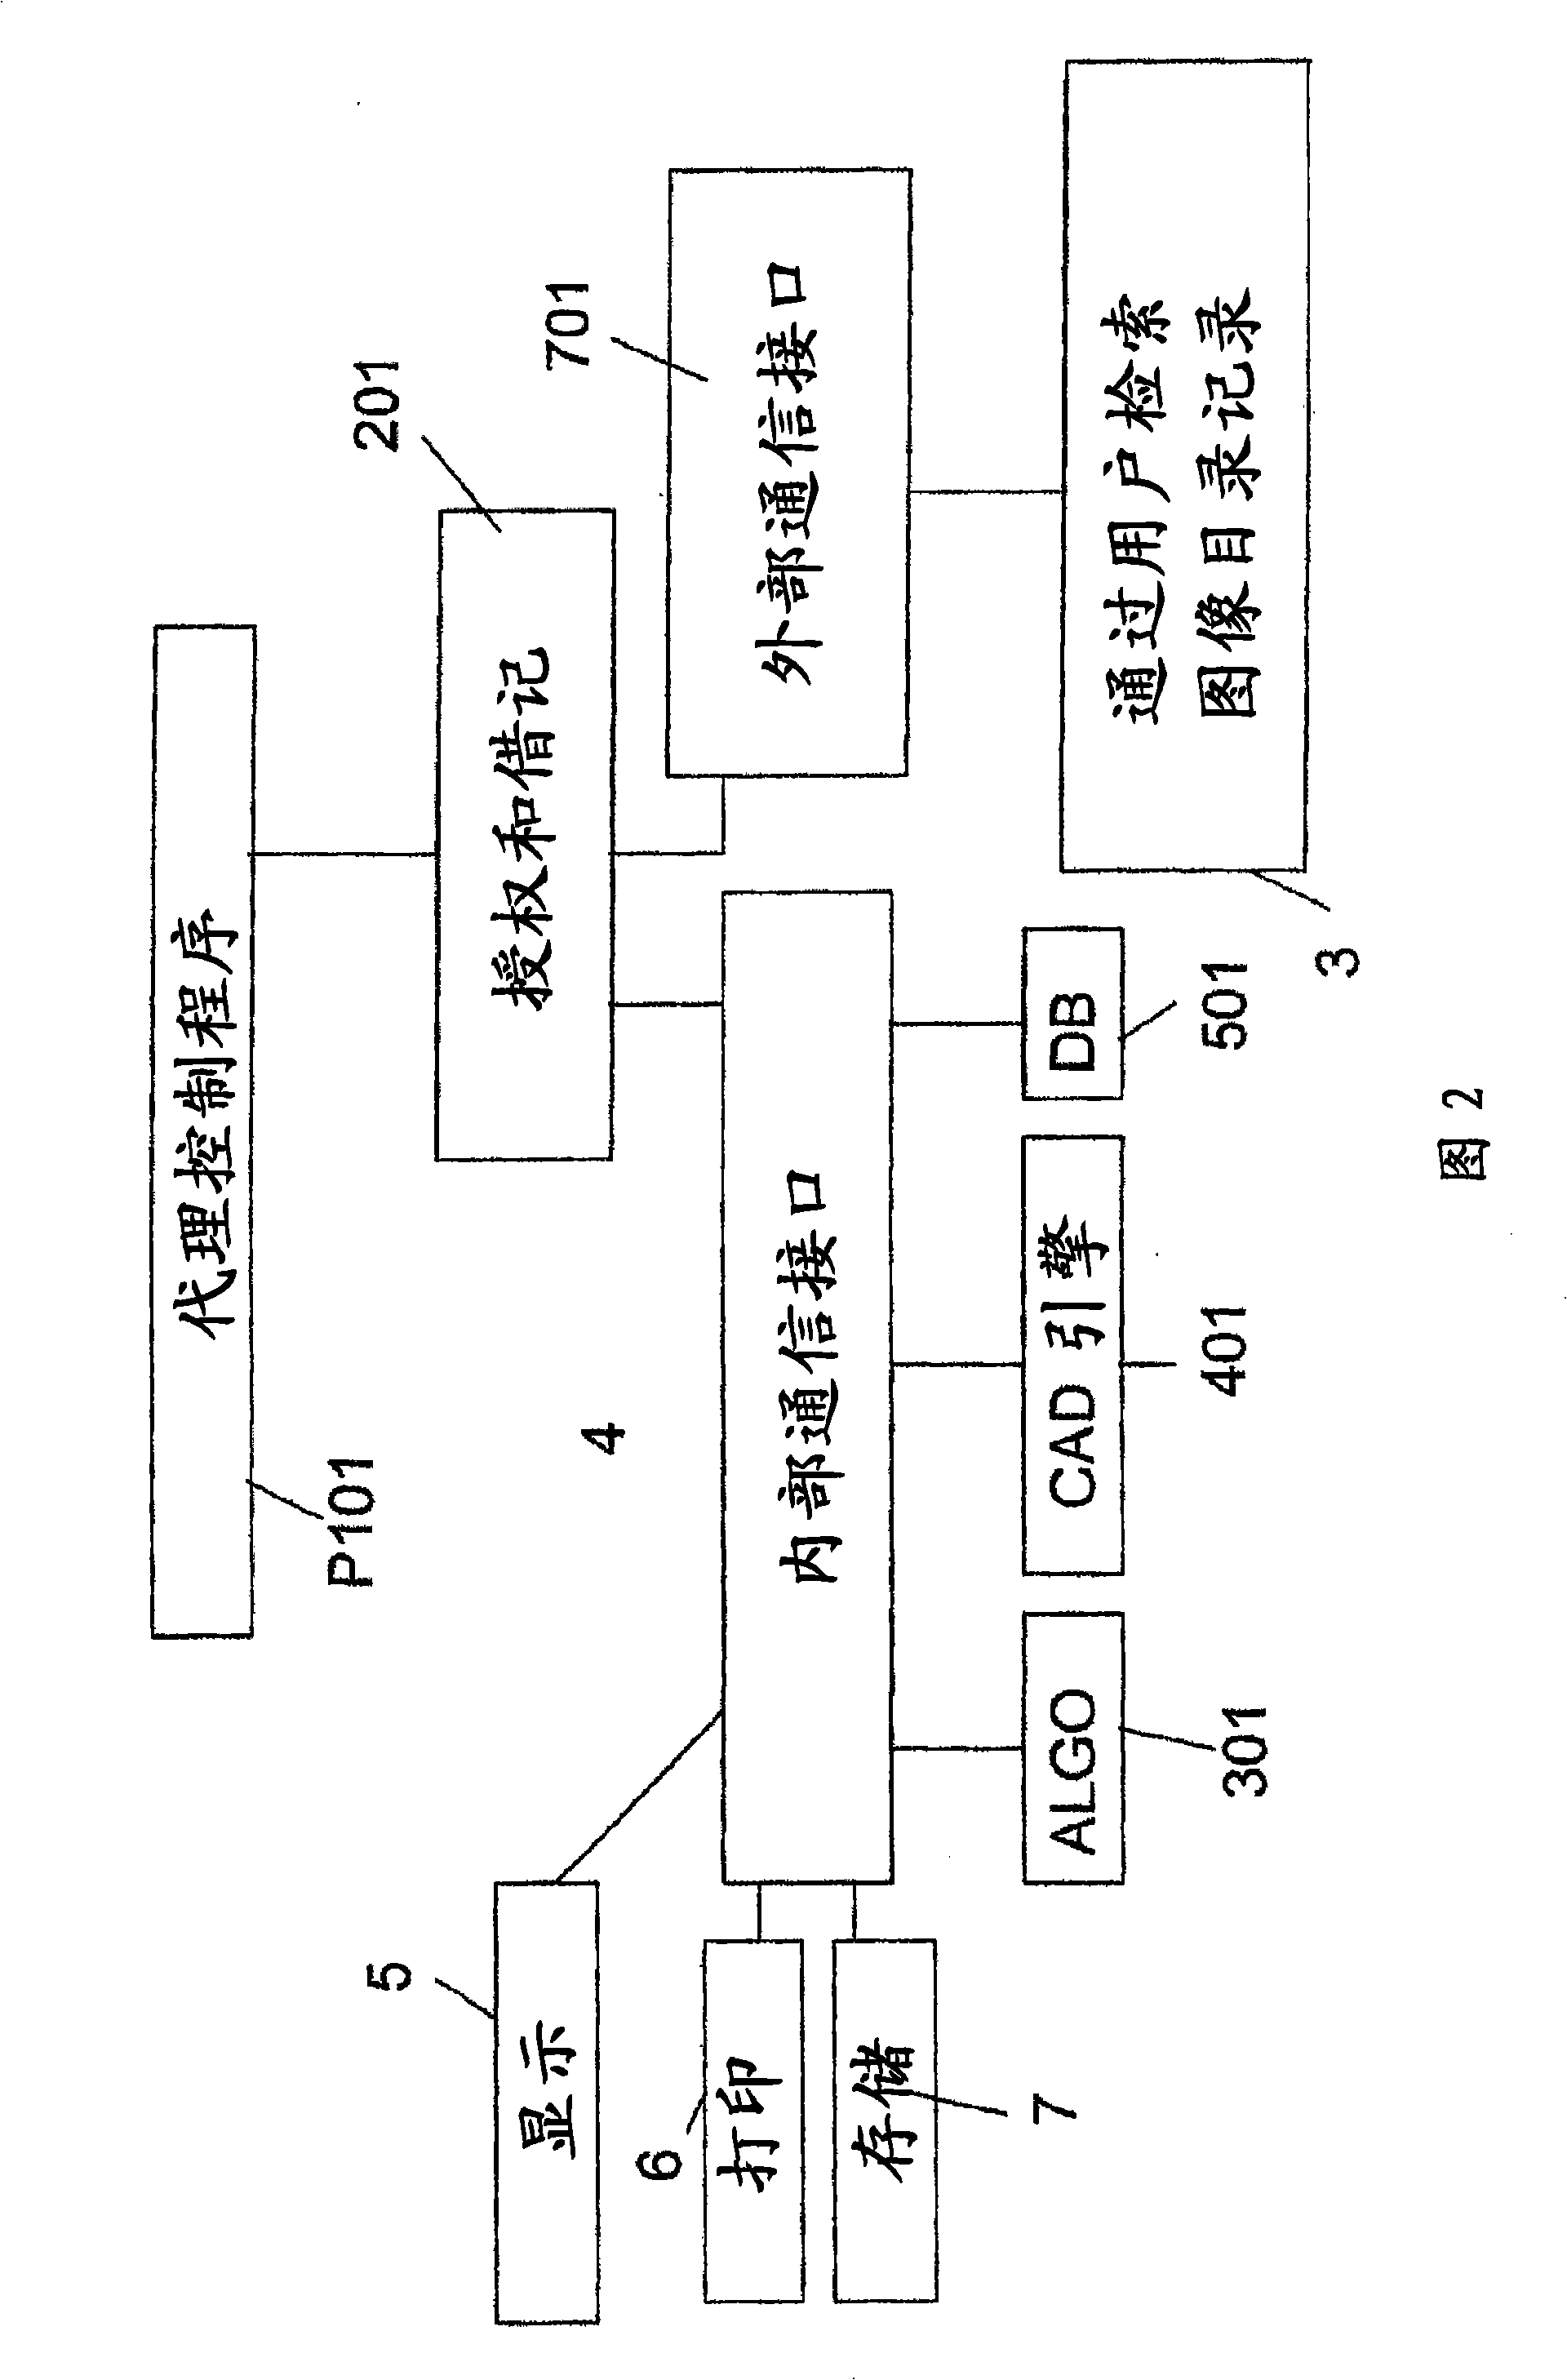 Image processing system, particularly for use with diagnostic images